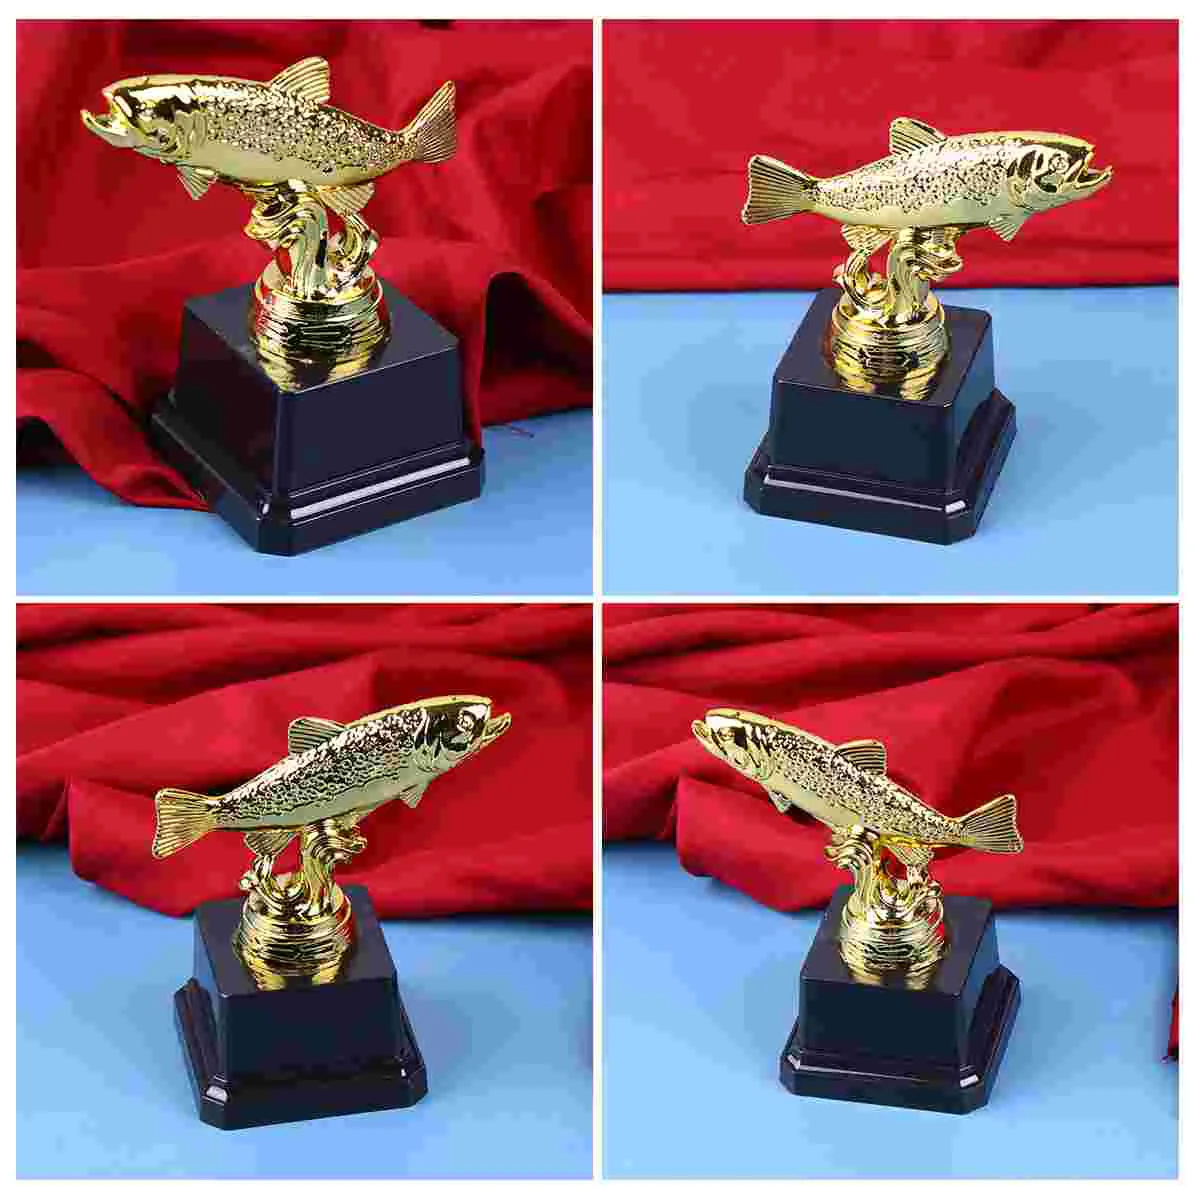 

Trophy Award Cup Kids Fish Trophies Party Fishing Prize Goldstatue Winning Achievement Ceremony Footballcreative Favor Medals